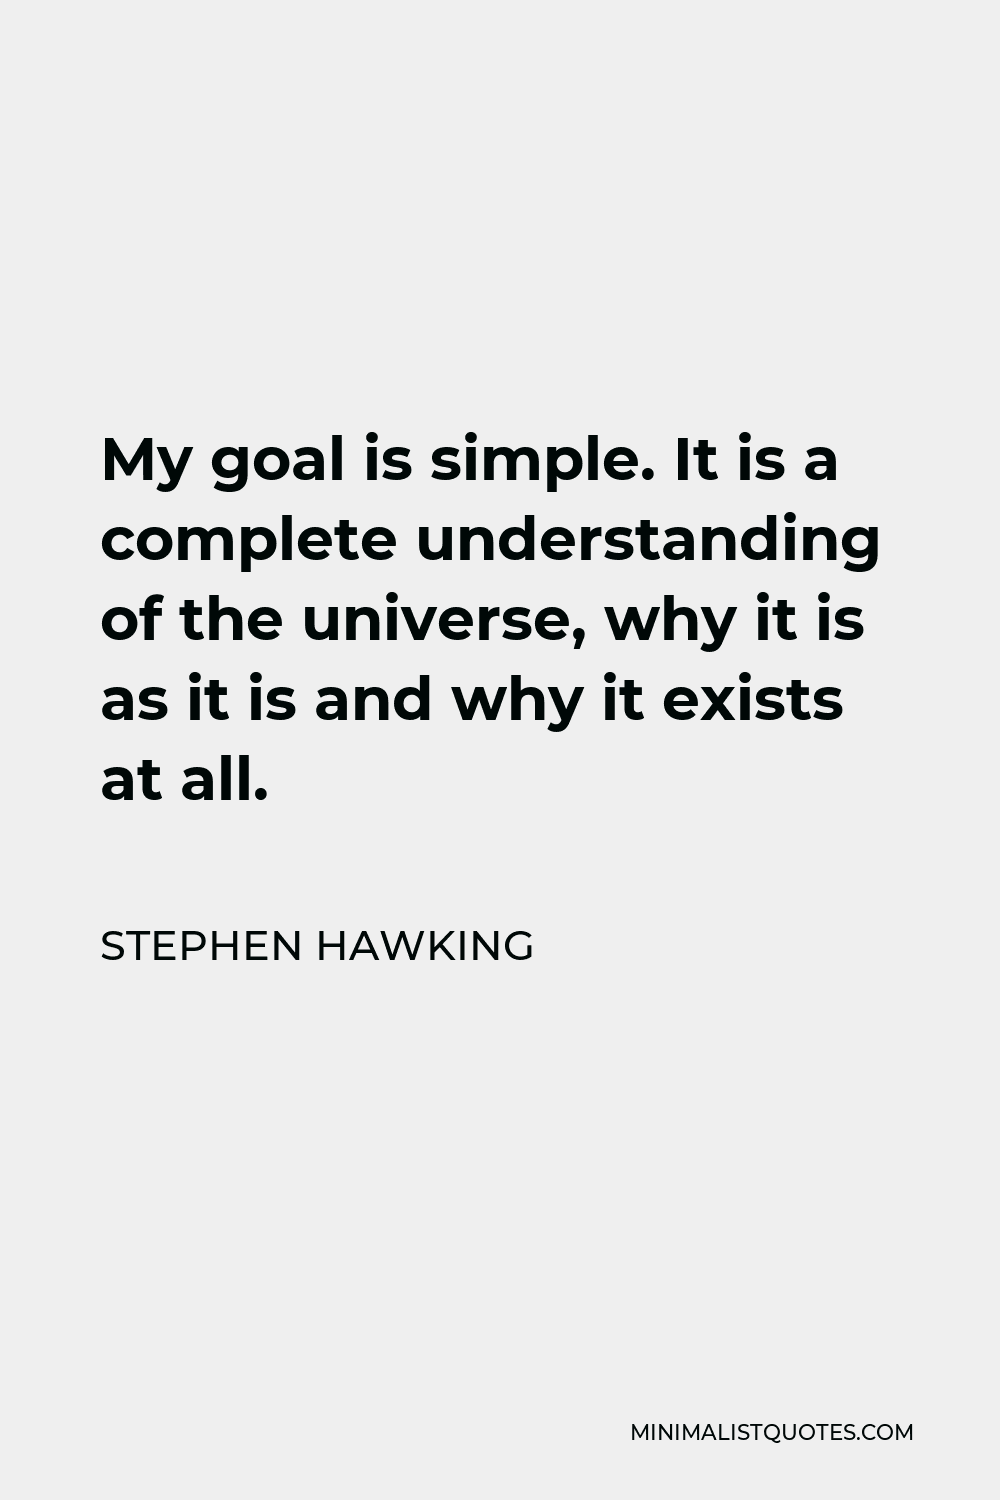 Stephen Hawking Quote - My goal is simple. It is a complete understanding of the universe, why it is as it is and why it exists at all.